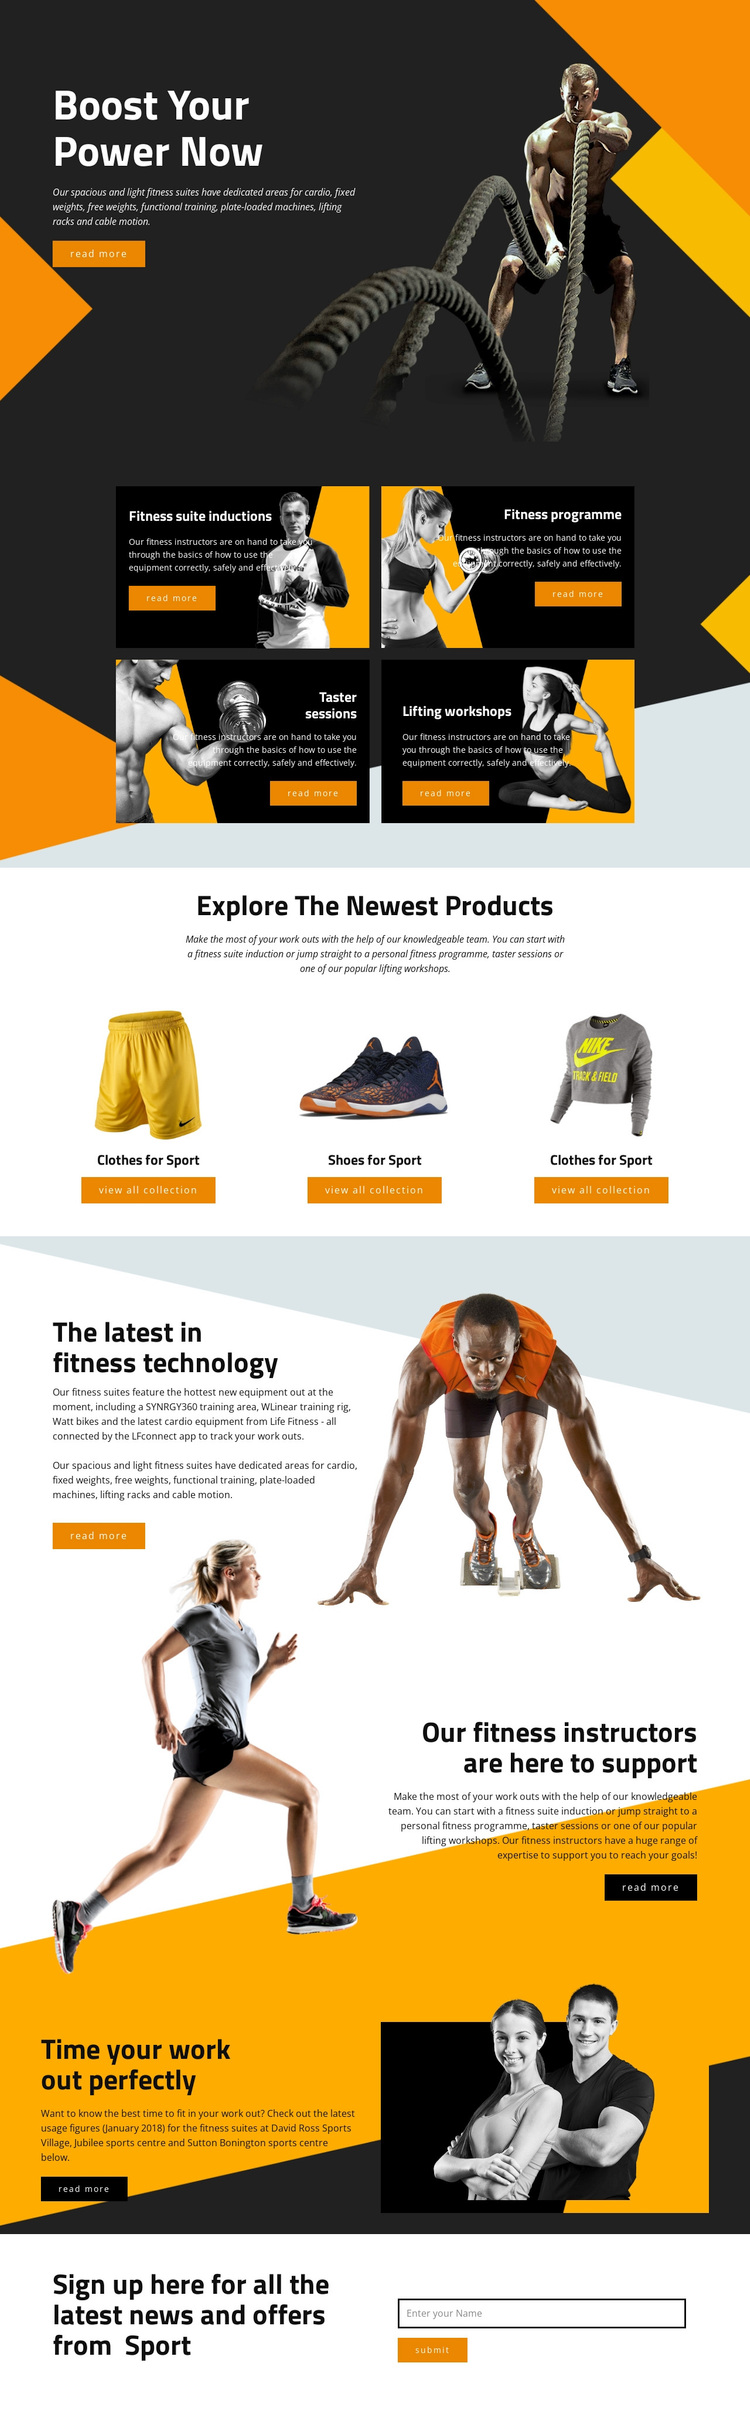 Page 19 - Free and customizable workout templates